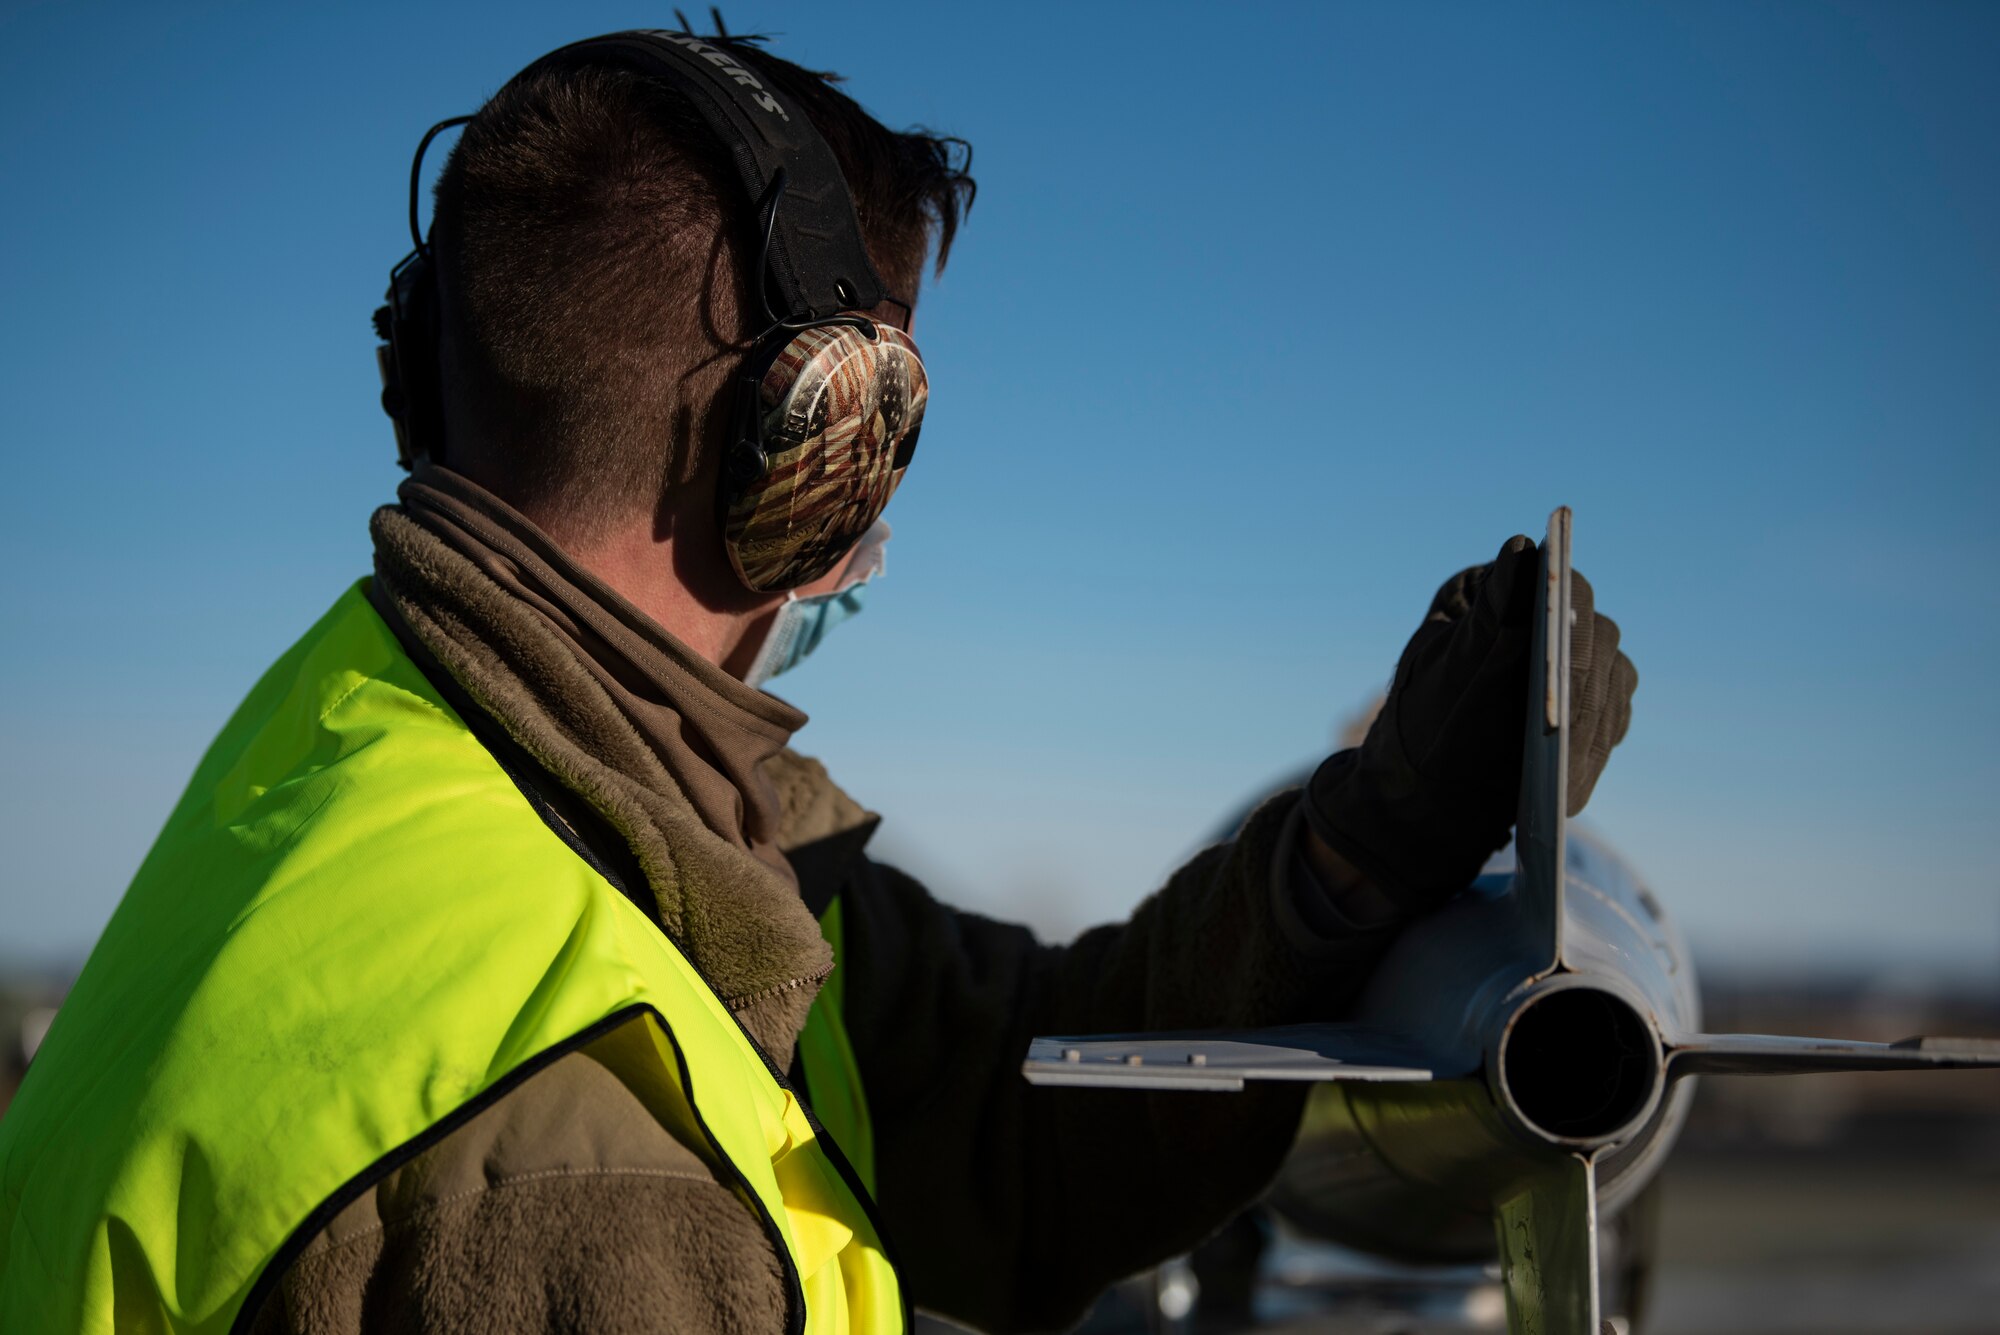 A weapons load crew team chief assigned to the 9th Expeditionary Bomb Squadron prepares a bomb dummy unit to be transported to a B-1B Lancer at Ørland Air Force Station, Norway, March 13, 2021. Bomber weapon system officers generally use BDU munitions while conducting routine combat training missions. (U.S. Air Force photo by Airman 1st Class Colin Hollowell)